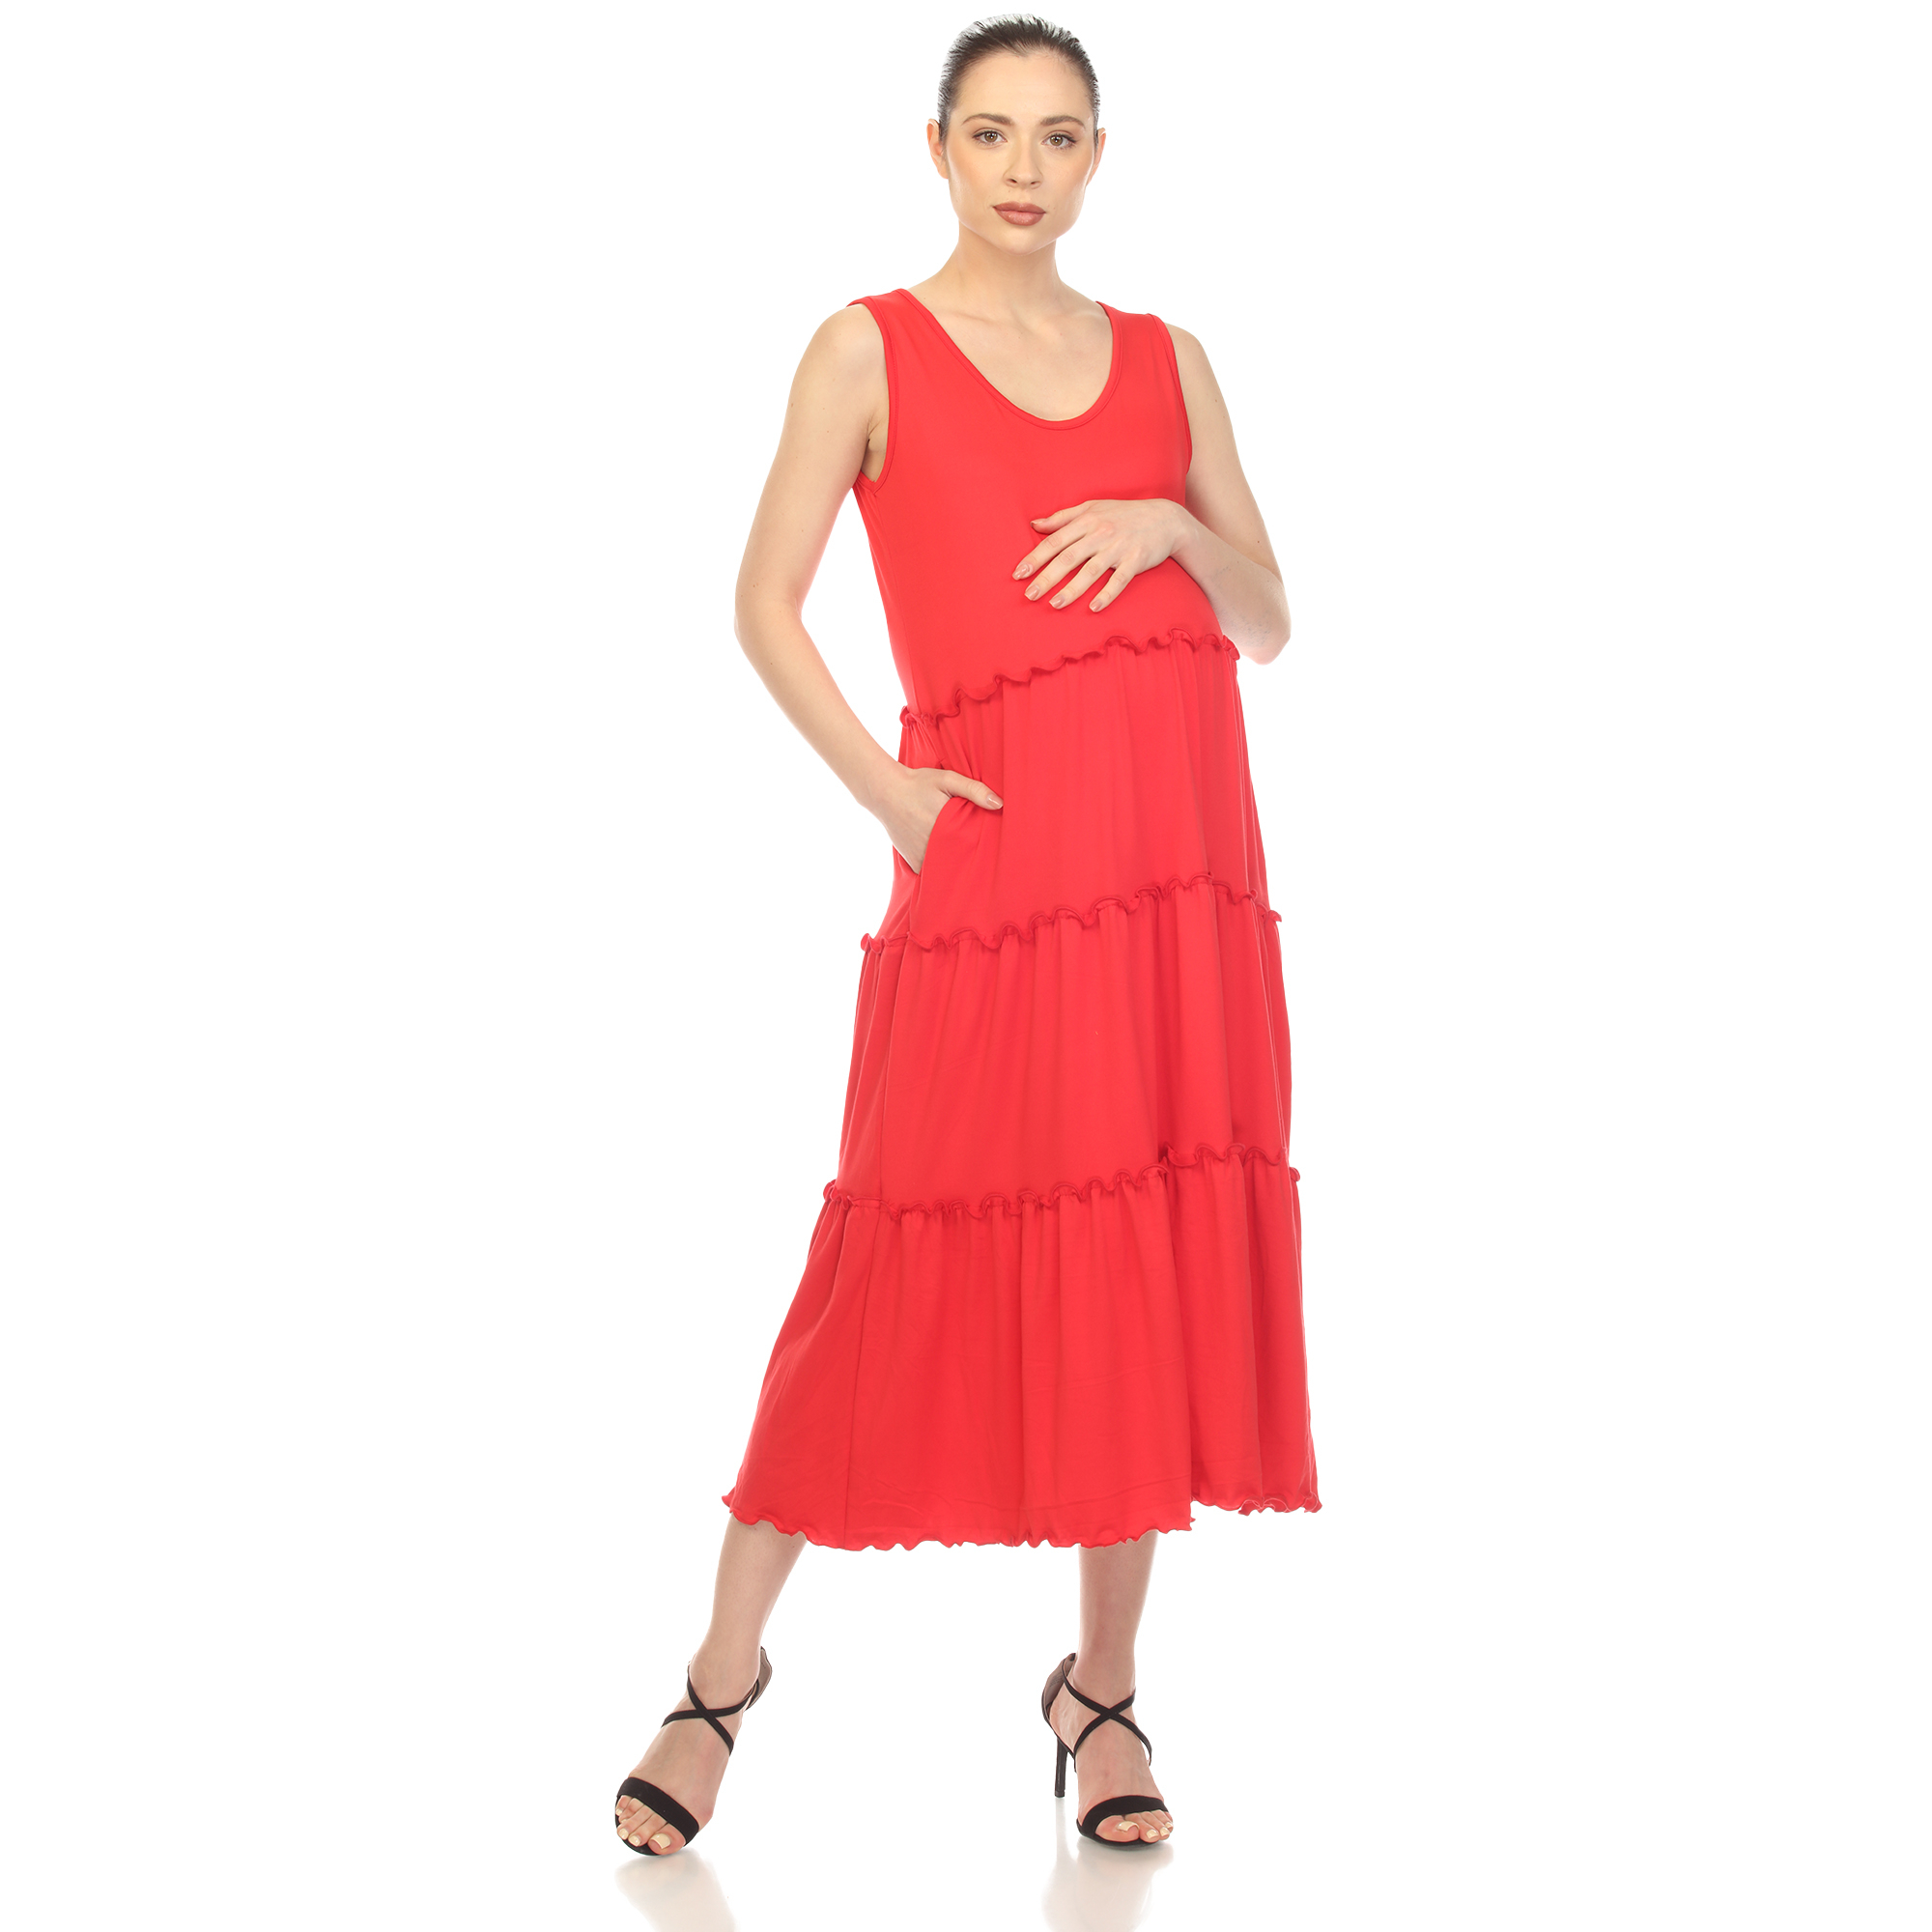 White Mark Women's Maternity Scoop Neck Tiered Midi Dress - Ruby Red, Large